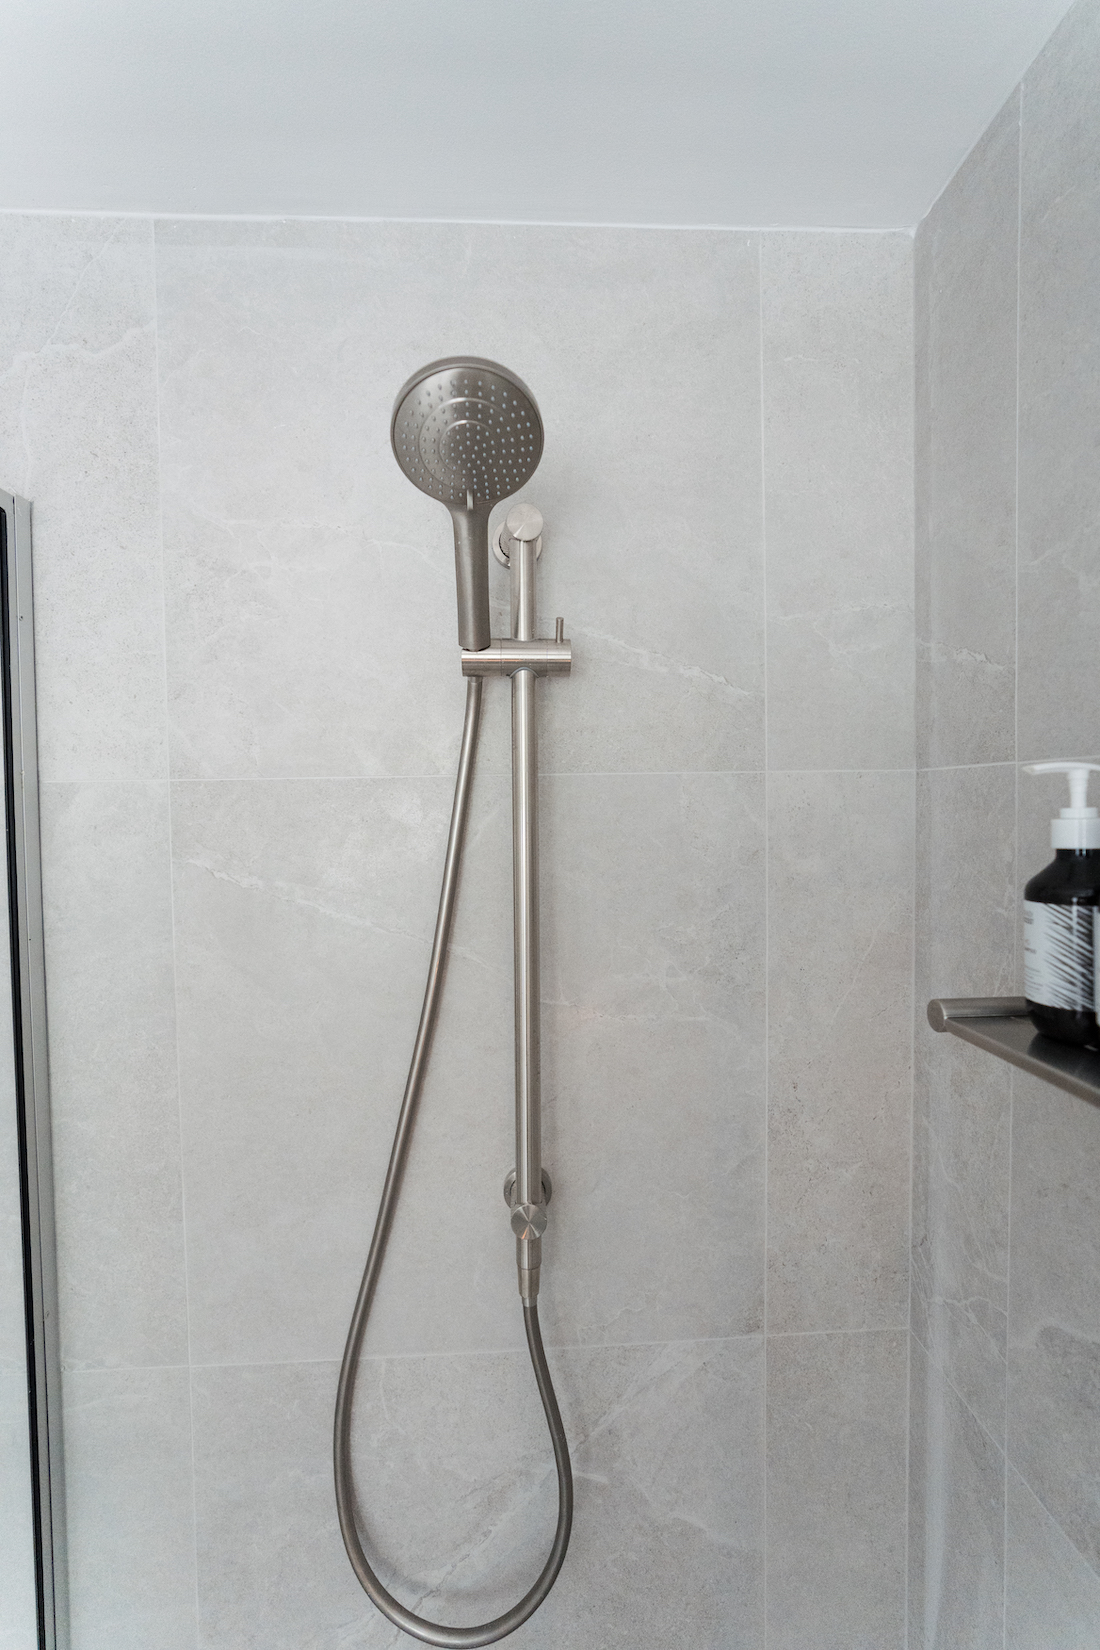 Brushed nickel shower by Nero from Tile Republic